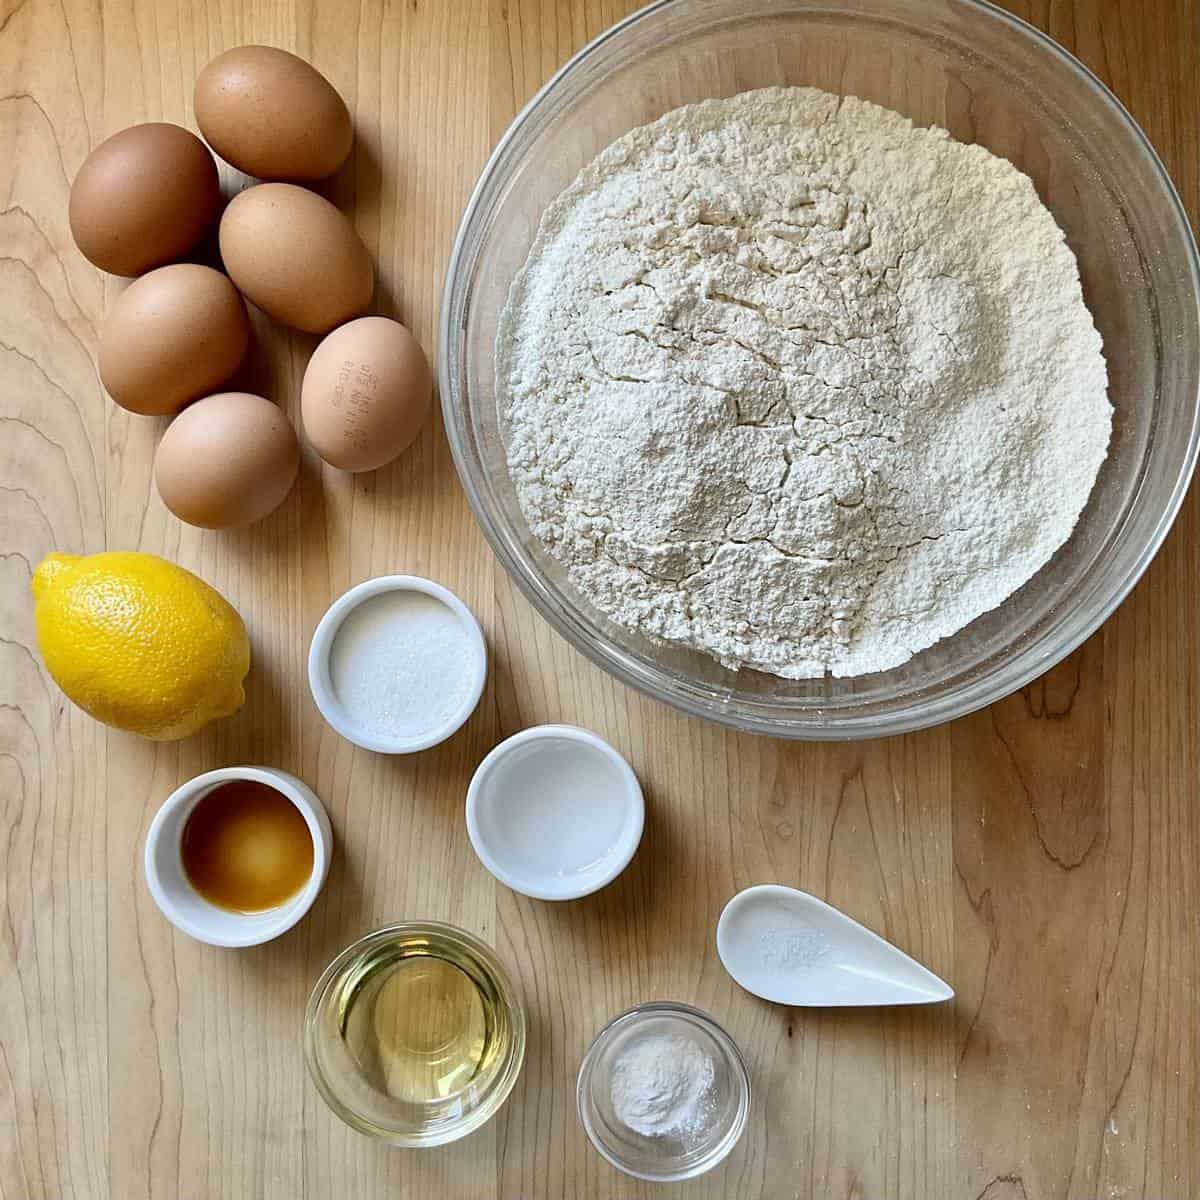 Ingredients to make egg taralli on a wooden board.